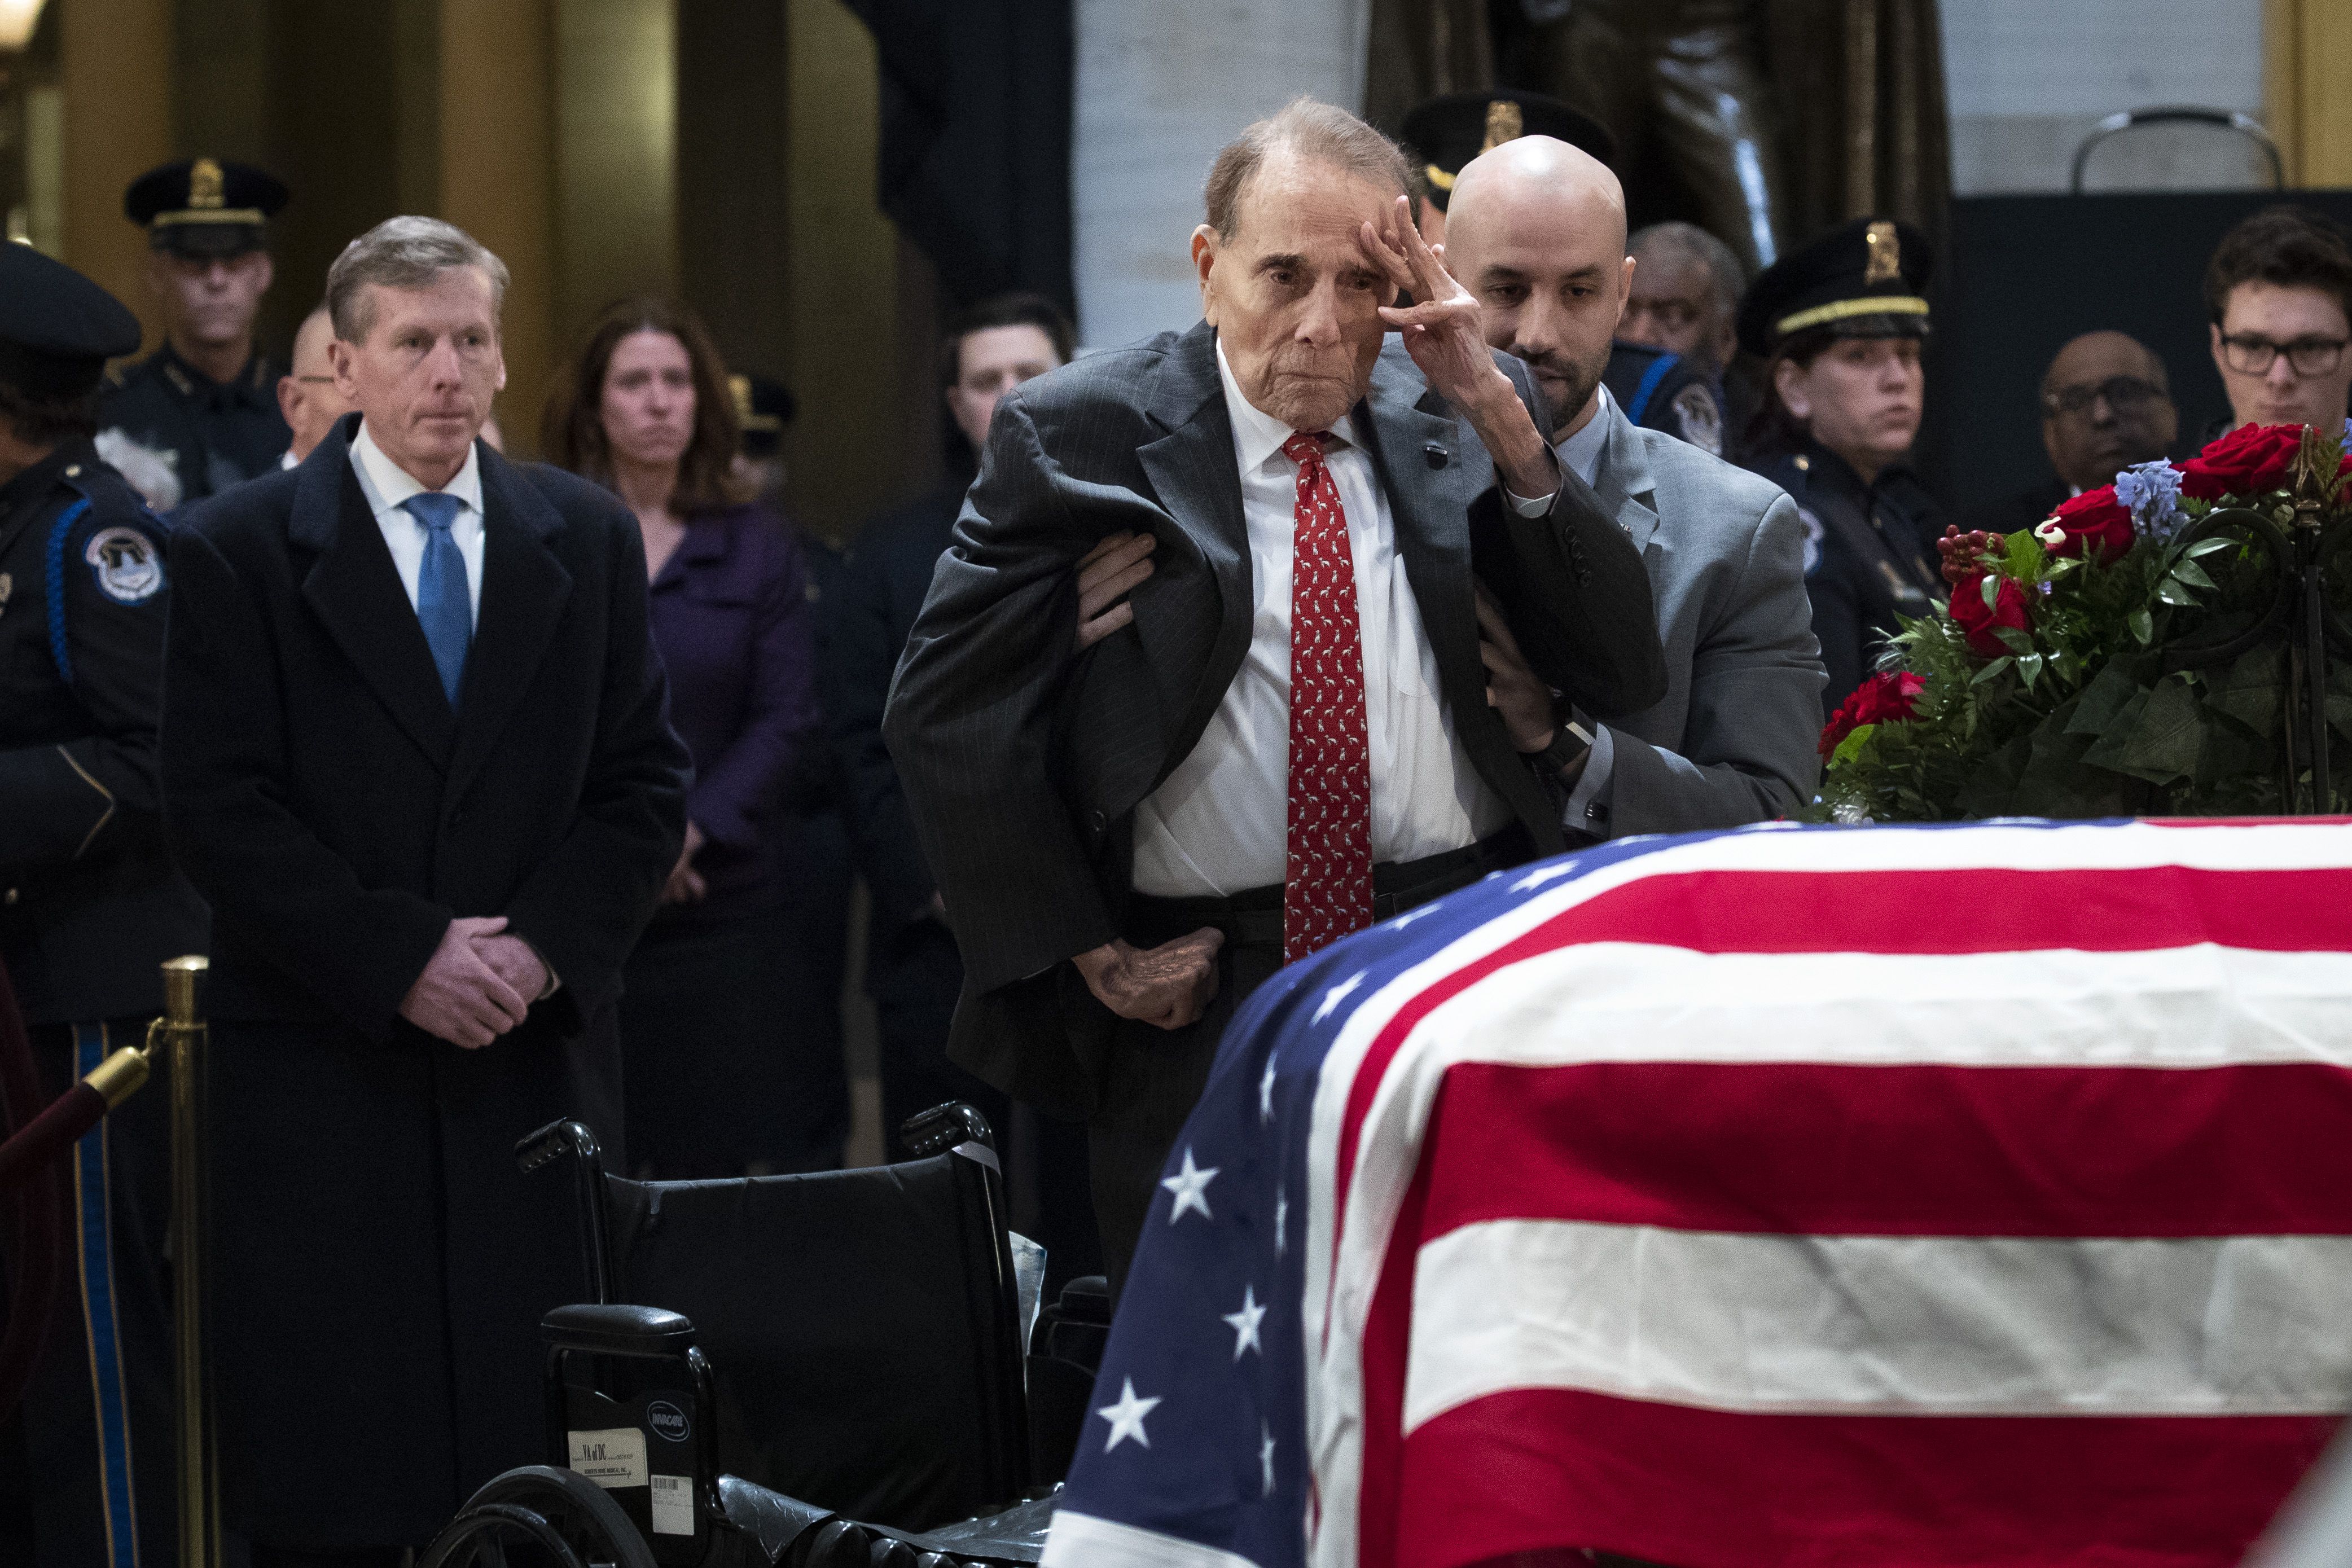 Bob Dole salutes the casket of the late former President George H.W. Bush in 2018